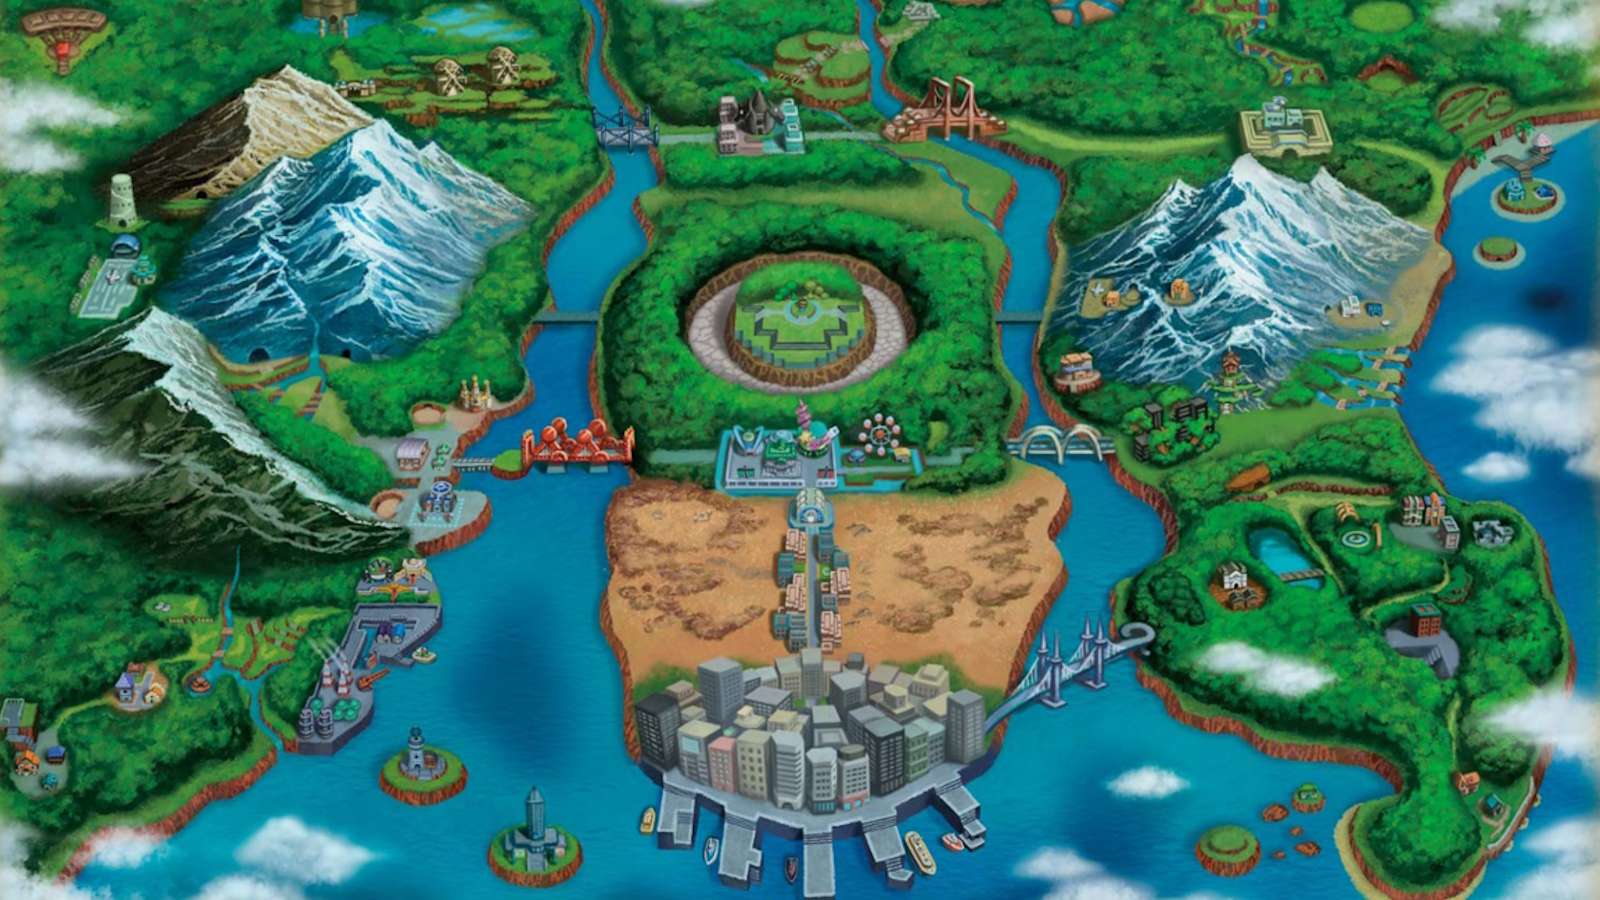 Map of Unova from Pokemon Black and White.